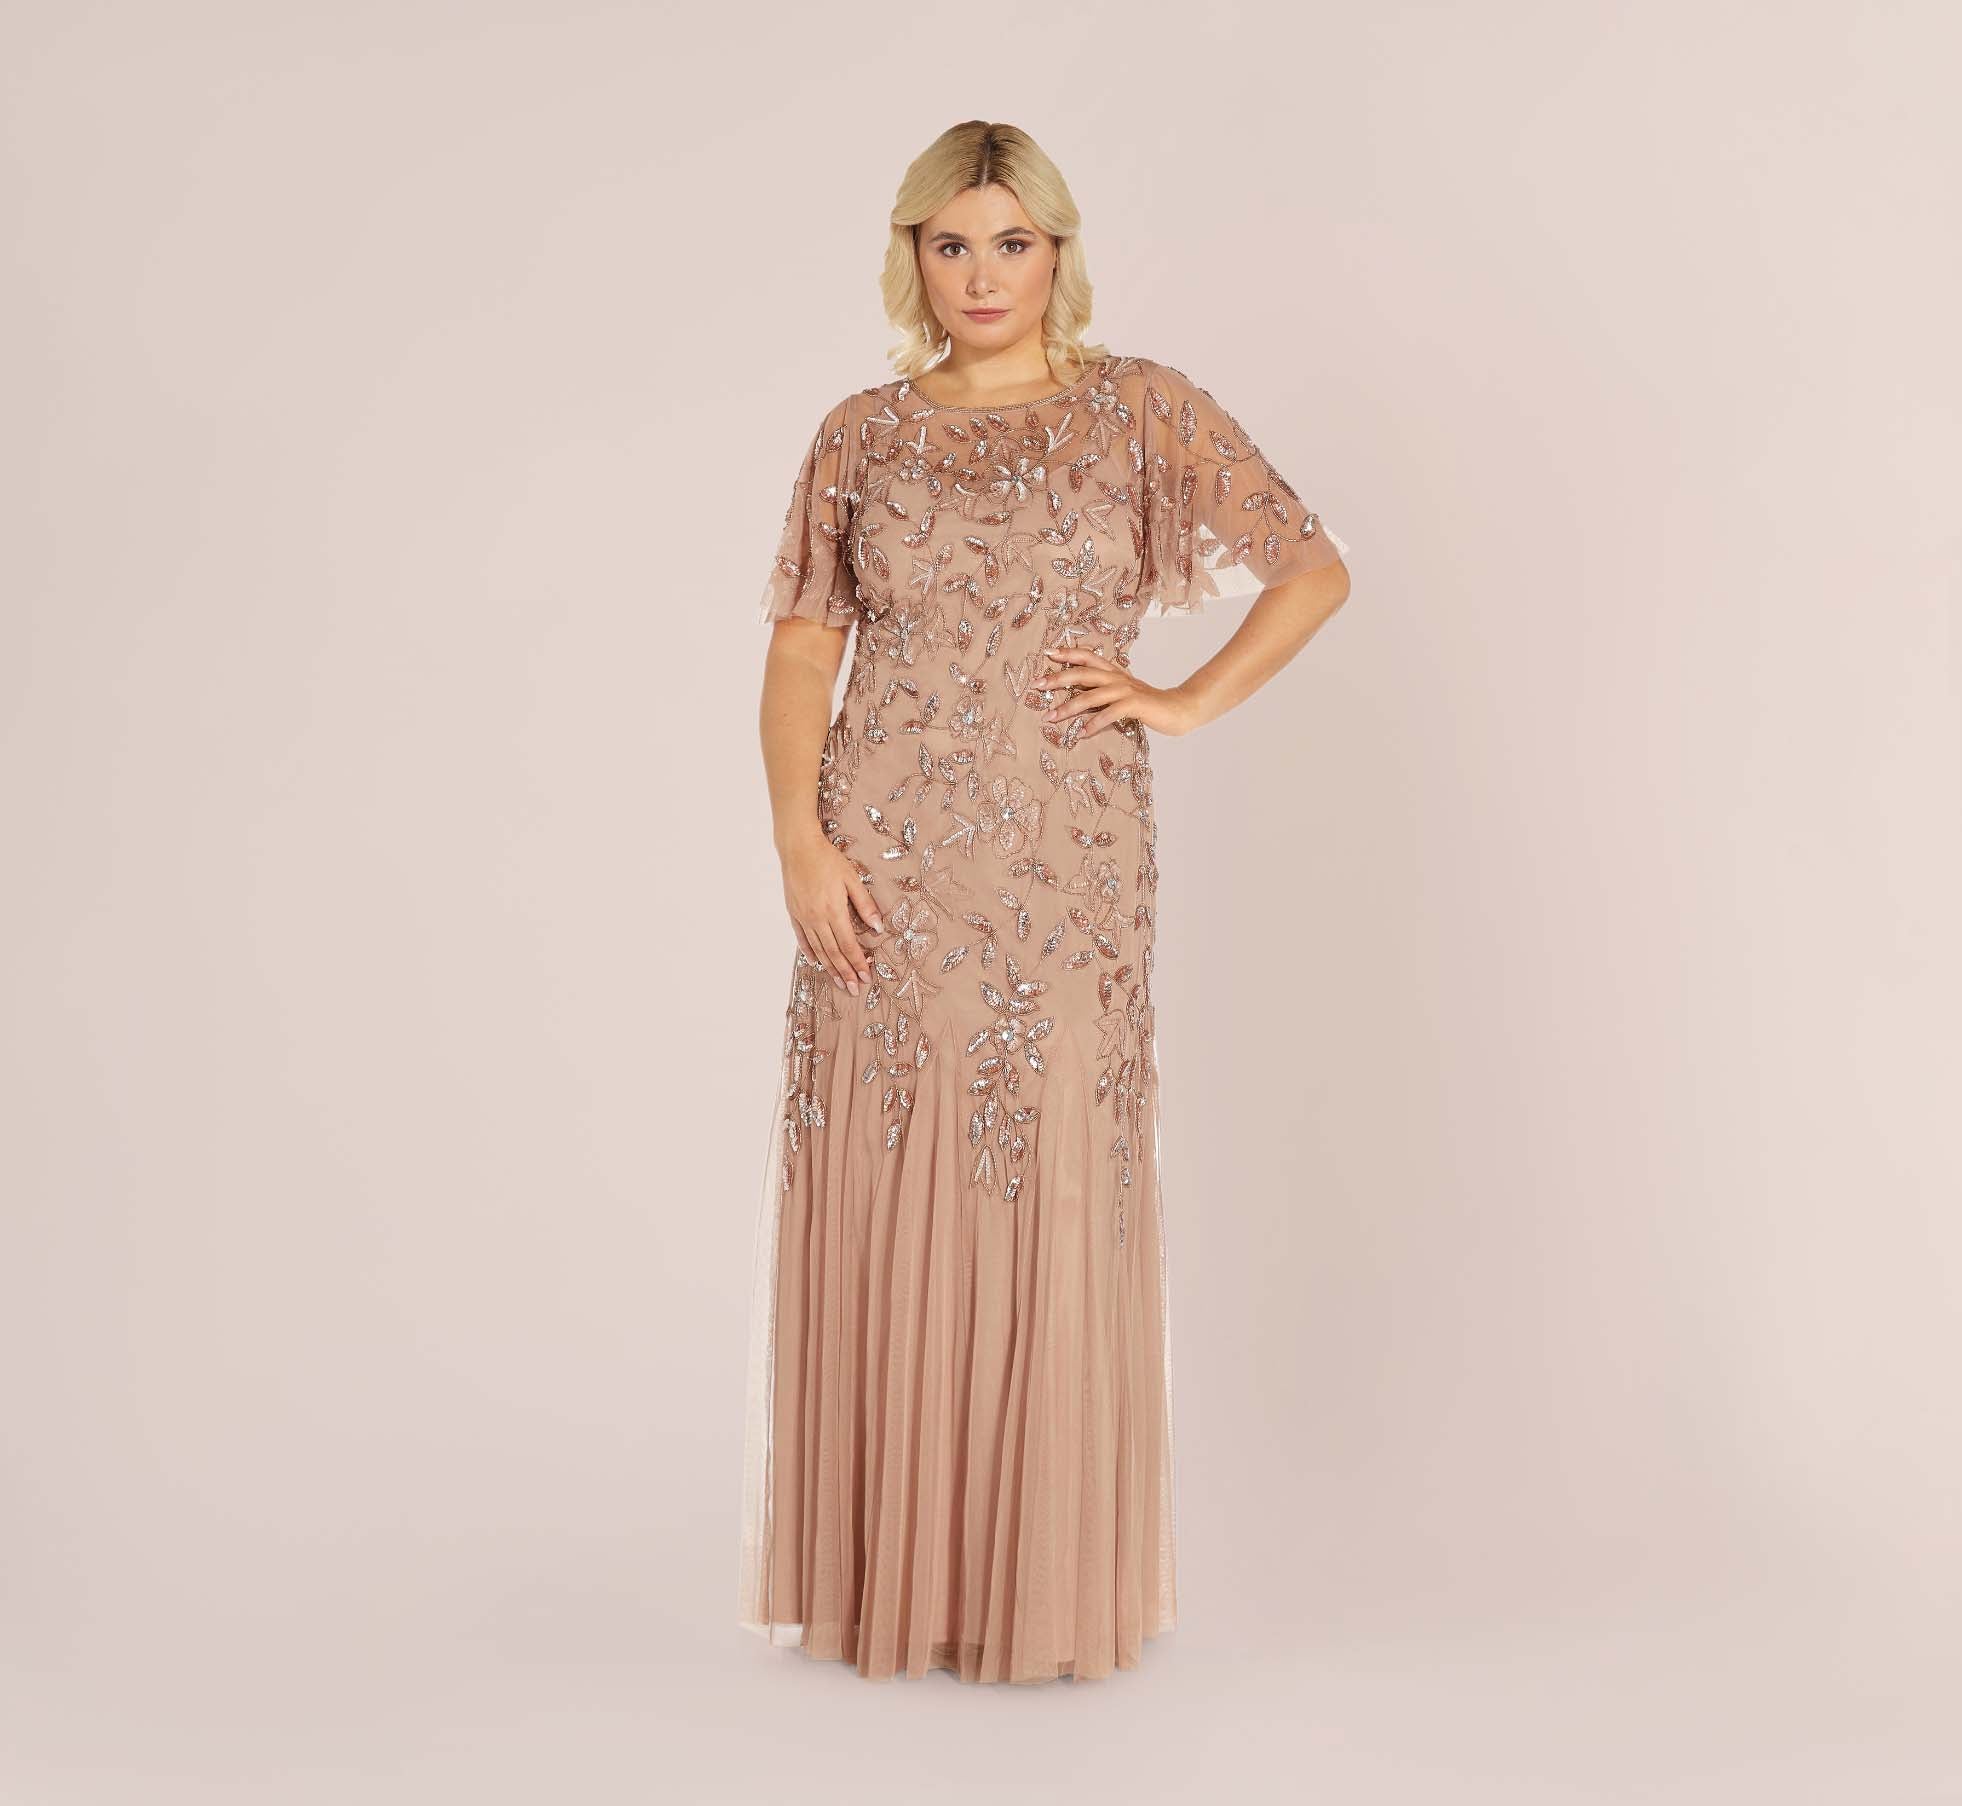 Adrianna Papell, Color: Rose Gold, Size: 12